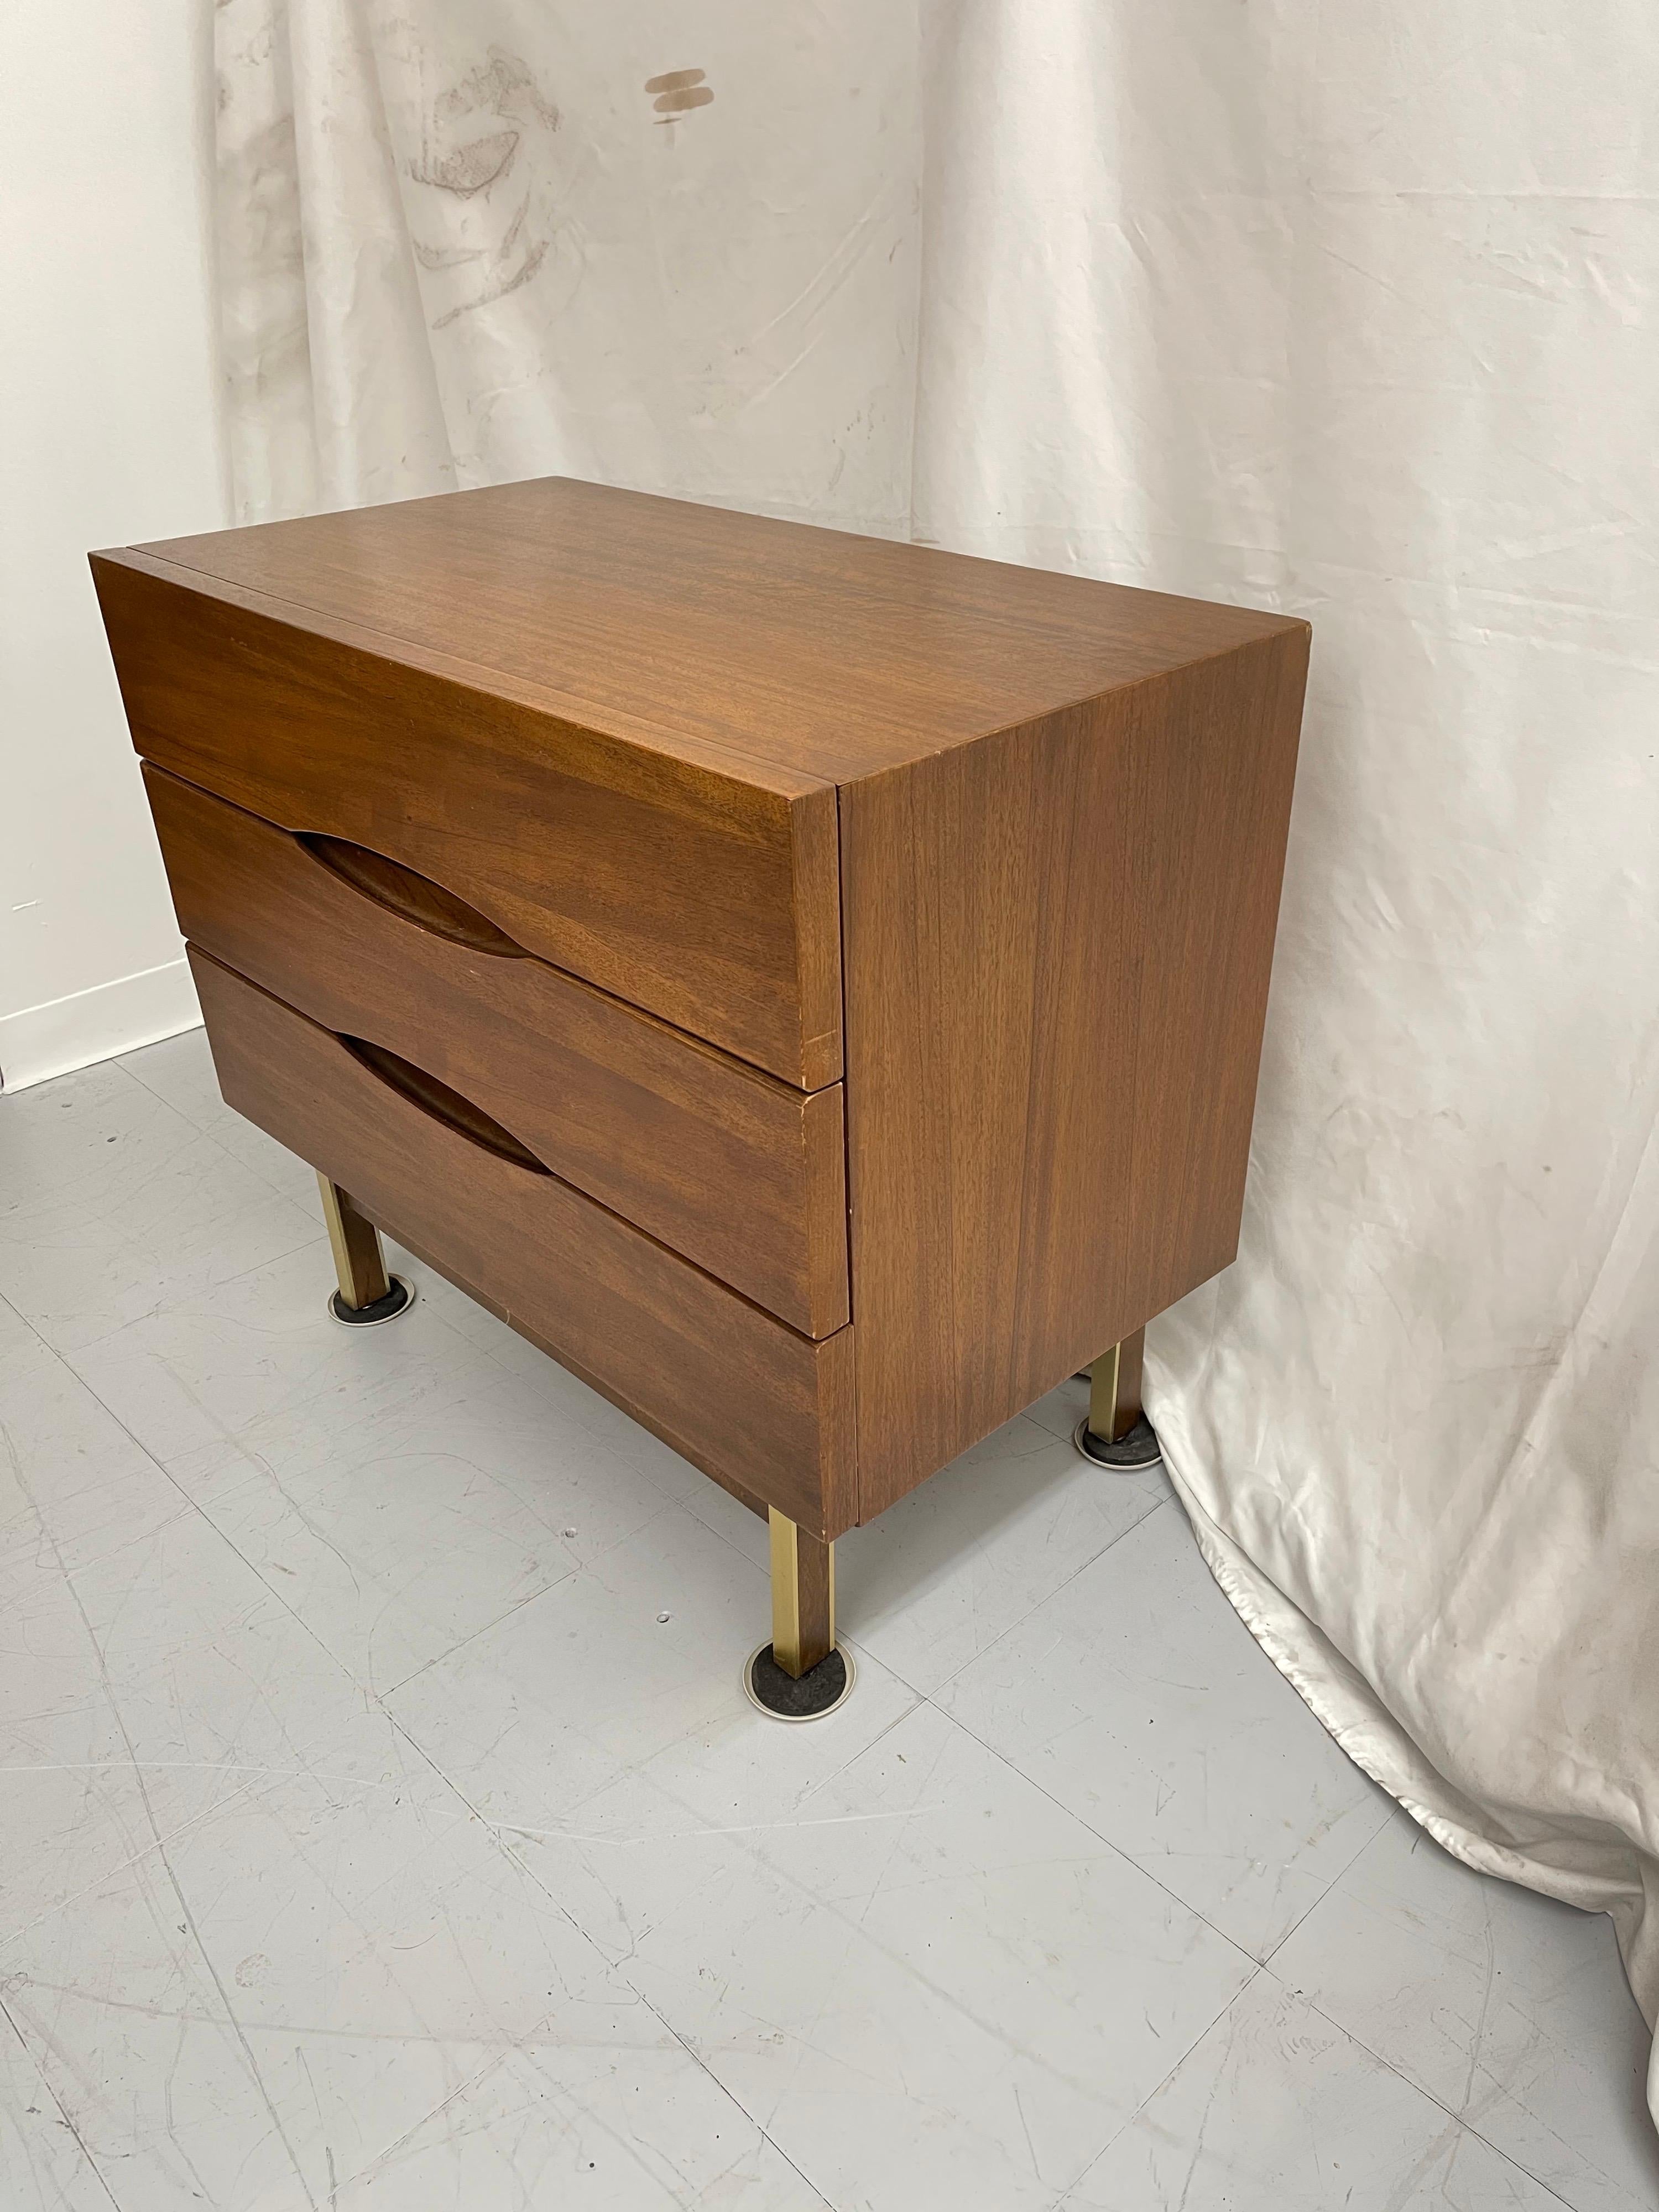 Clean lined three drawer dresser. Elliptical inset drawer openings and four brass-clad mahogany deeply recessed legs with high set mahogany stretchers.